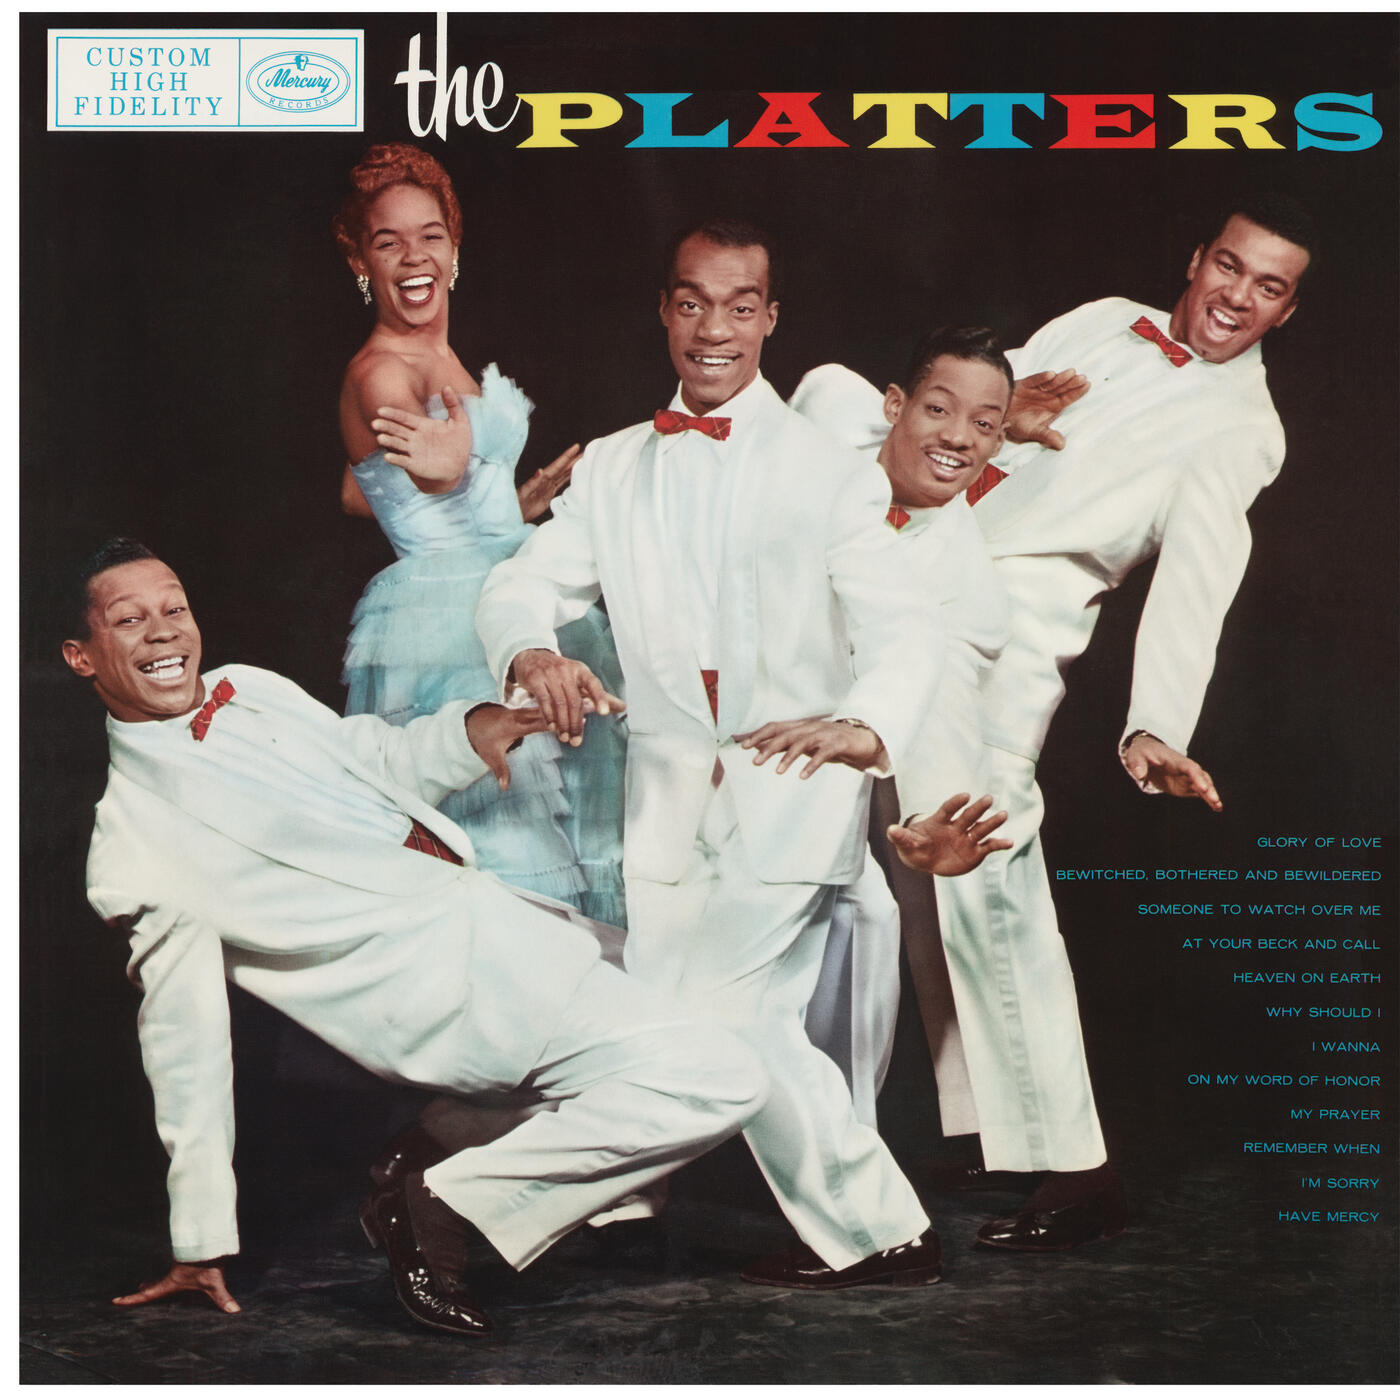 The Platters The Platters iHeart